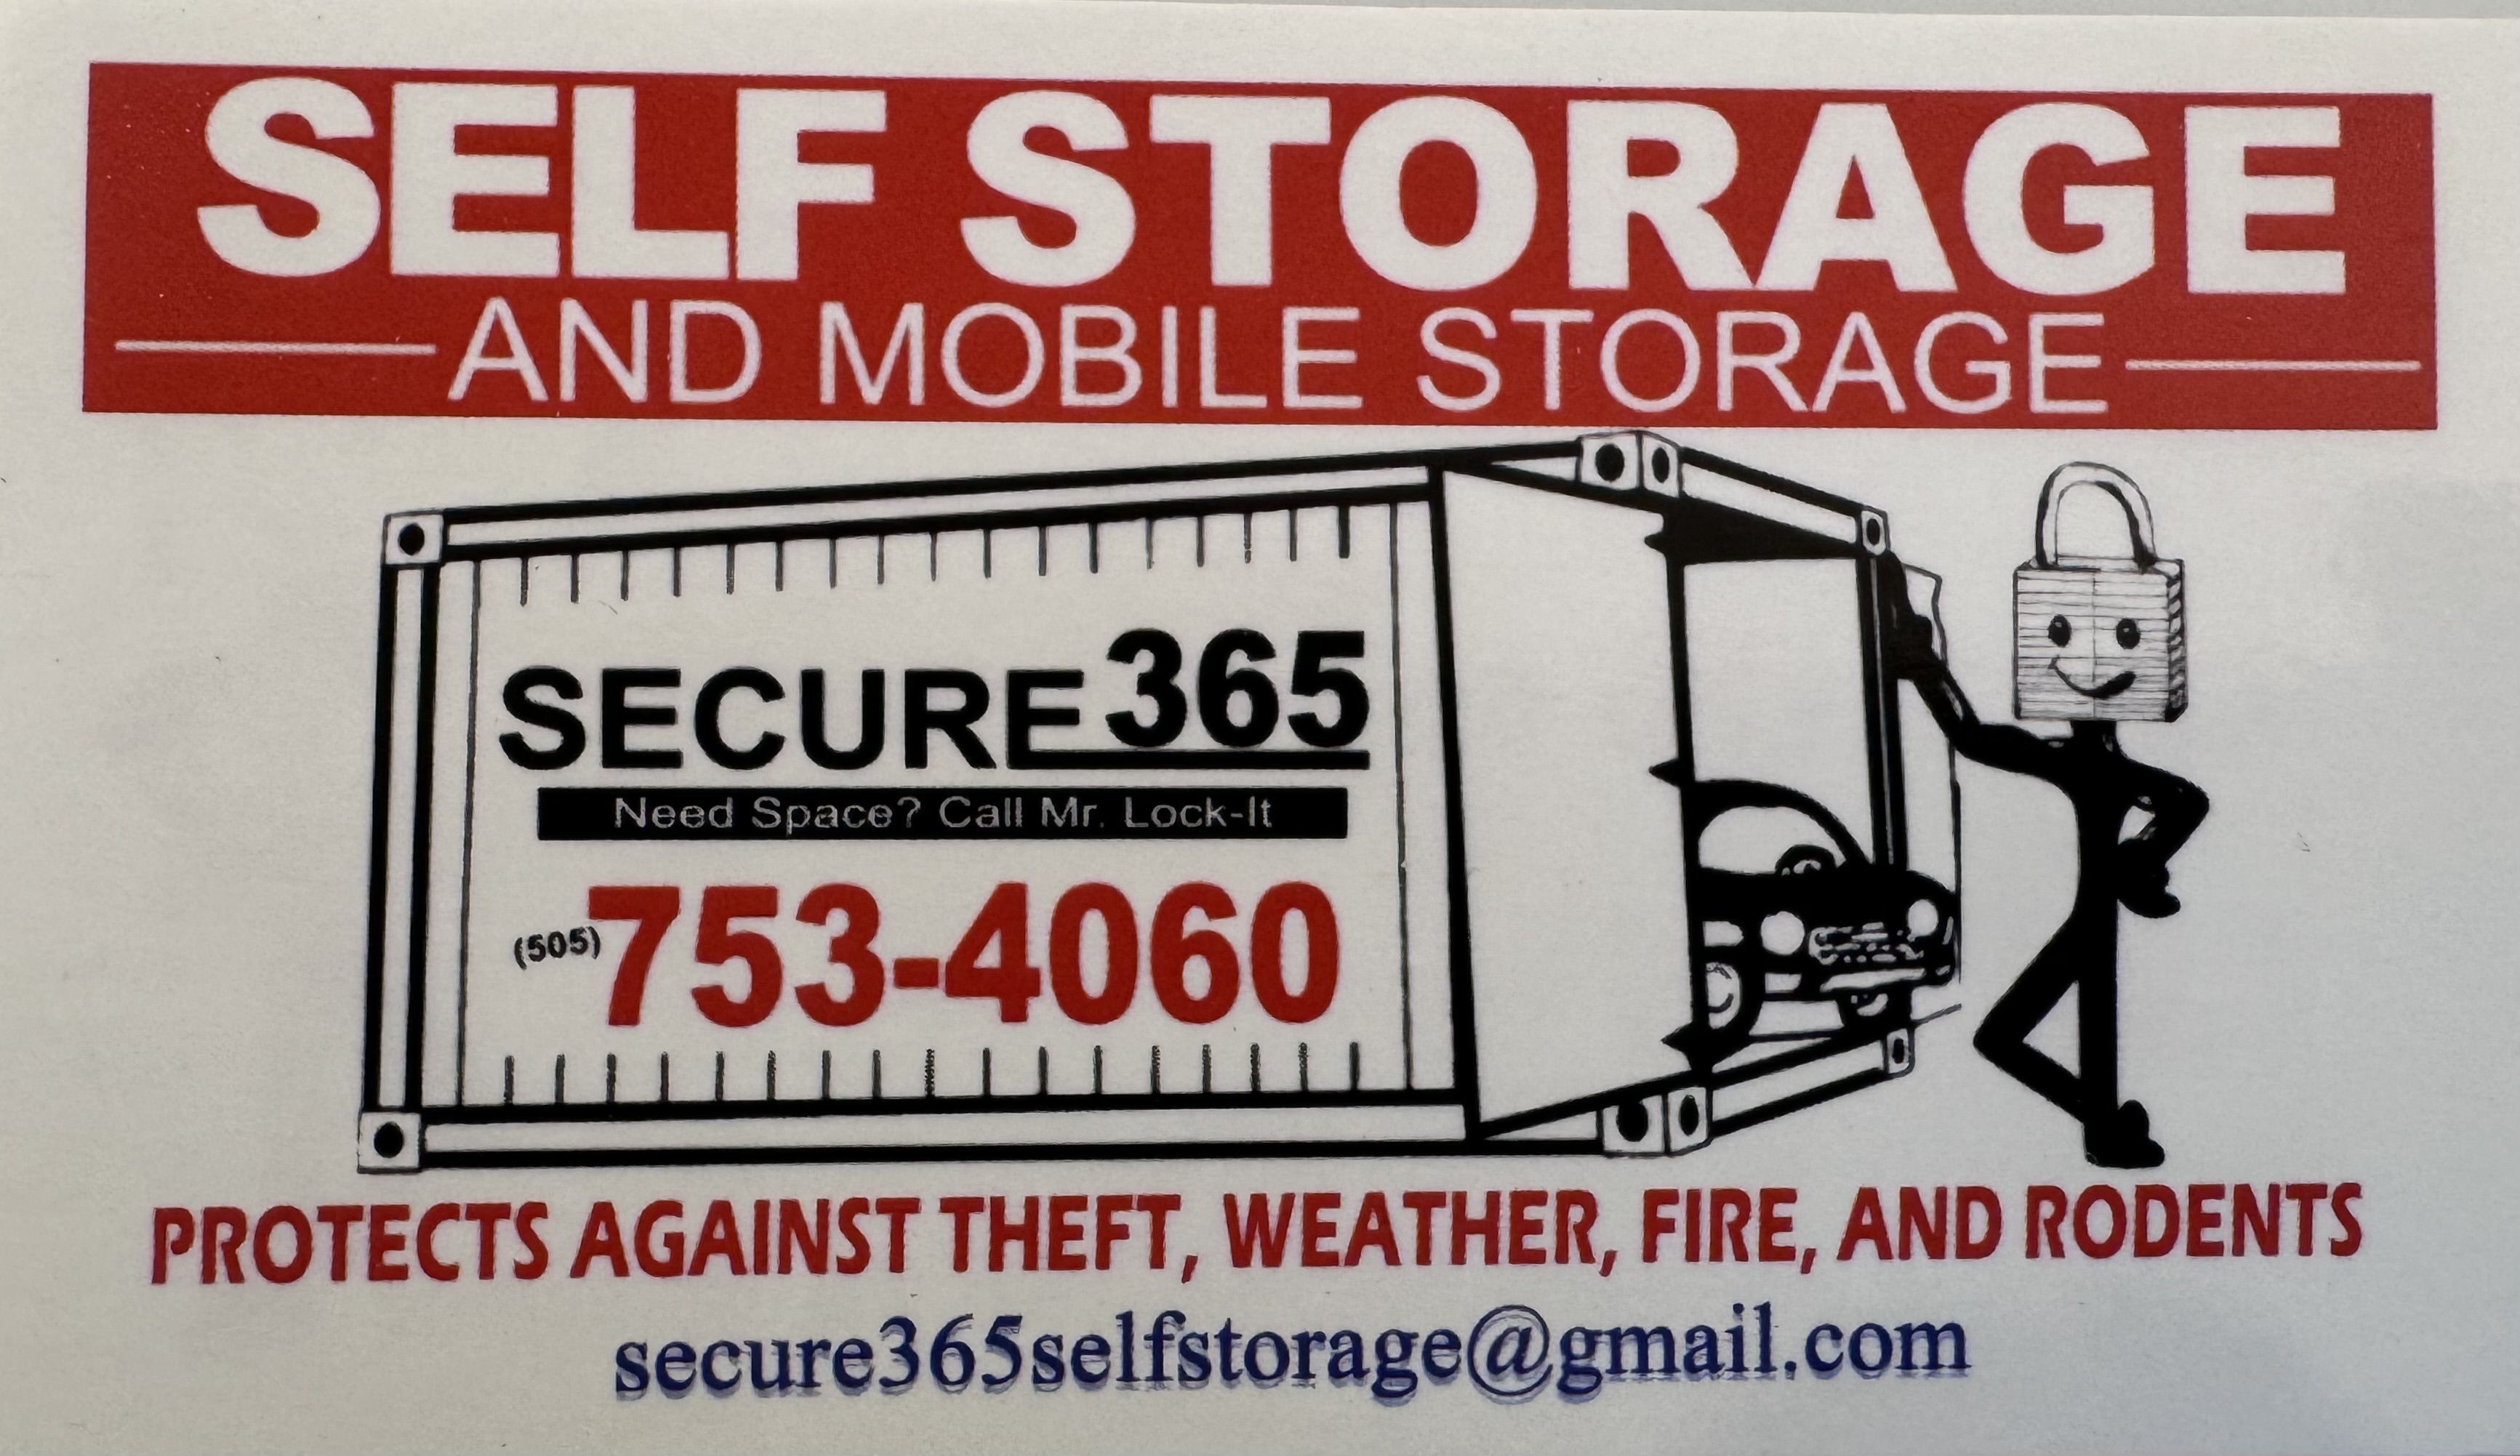 Secure 365 Self Storage and Mobile Storage